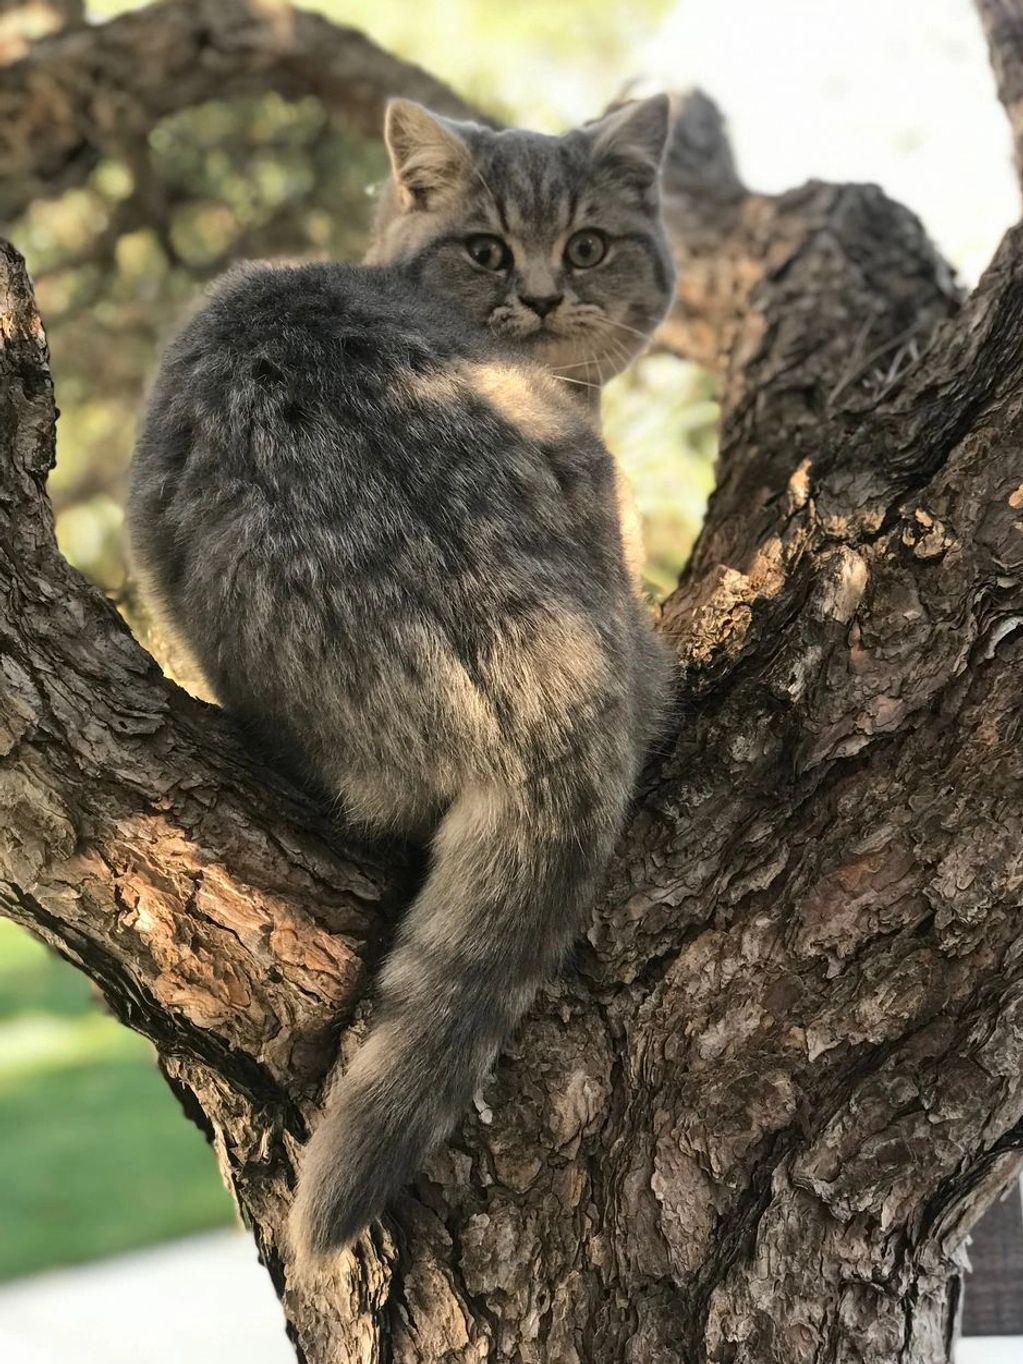 British Shorthair blue tabby male perched up in tree.